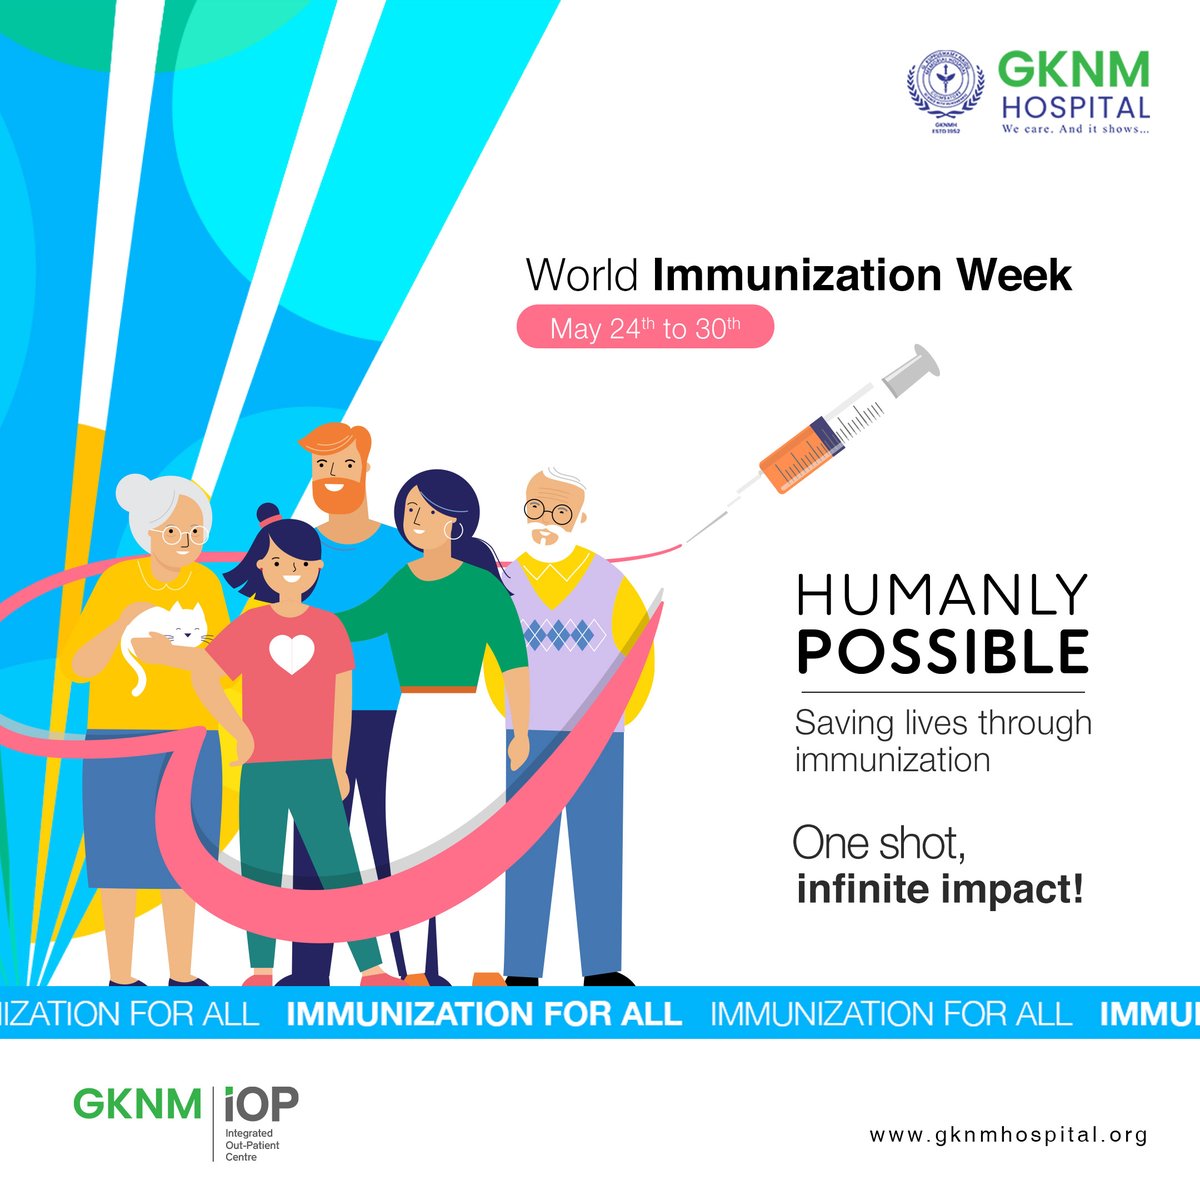 'From eradicating smallpox to nearly defeating polio, we have come a long way. Let us save and improve countless lives from vaccine-preventable diseases and protect the next generations' #WorldImmunizationWeek #HumanlyPossible #VaccinesWork #GKNMIOP #GKNM #GKNMH #GKNMHospital